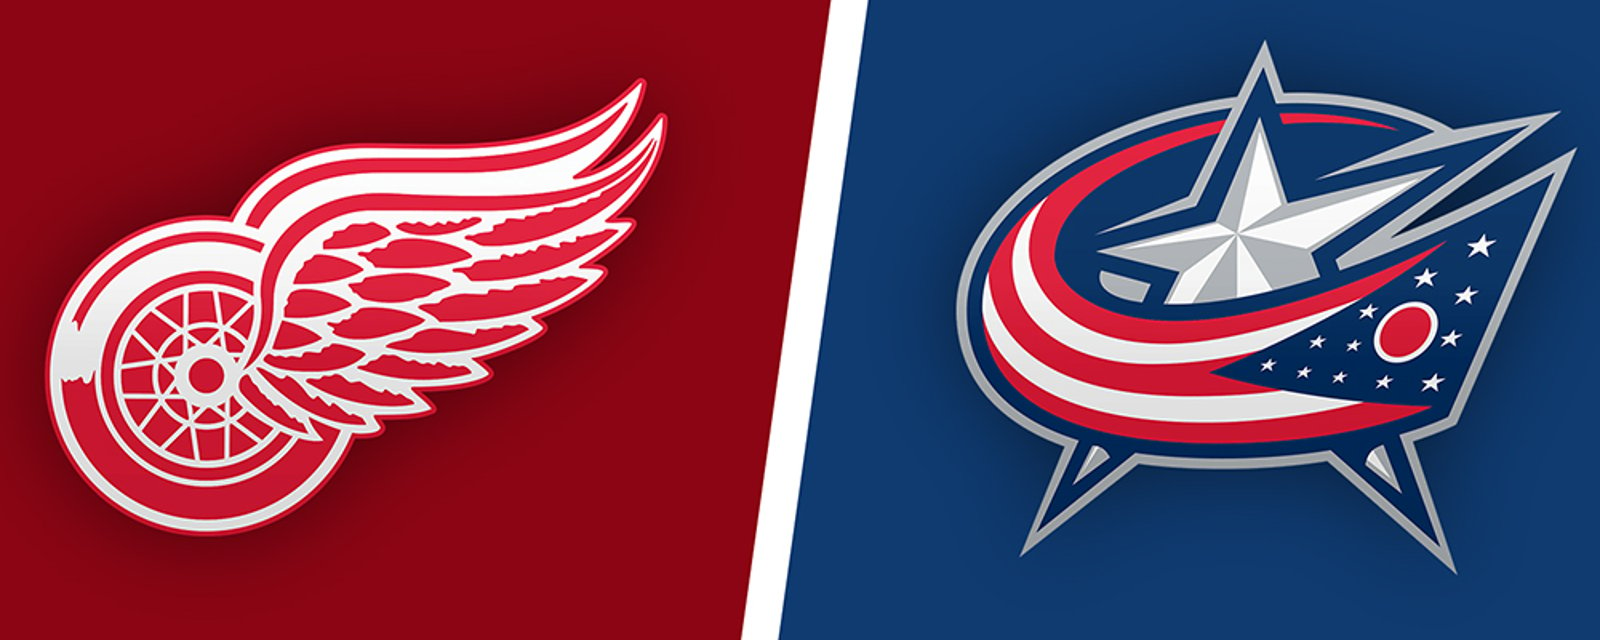 Red Wings release lineup for exhibition matchup vs. Blue Jackets 